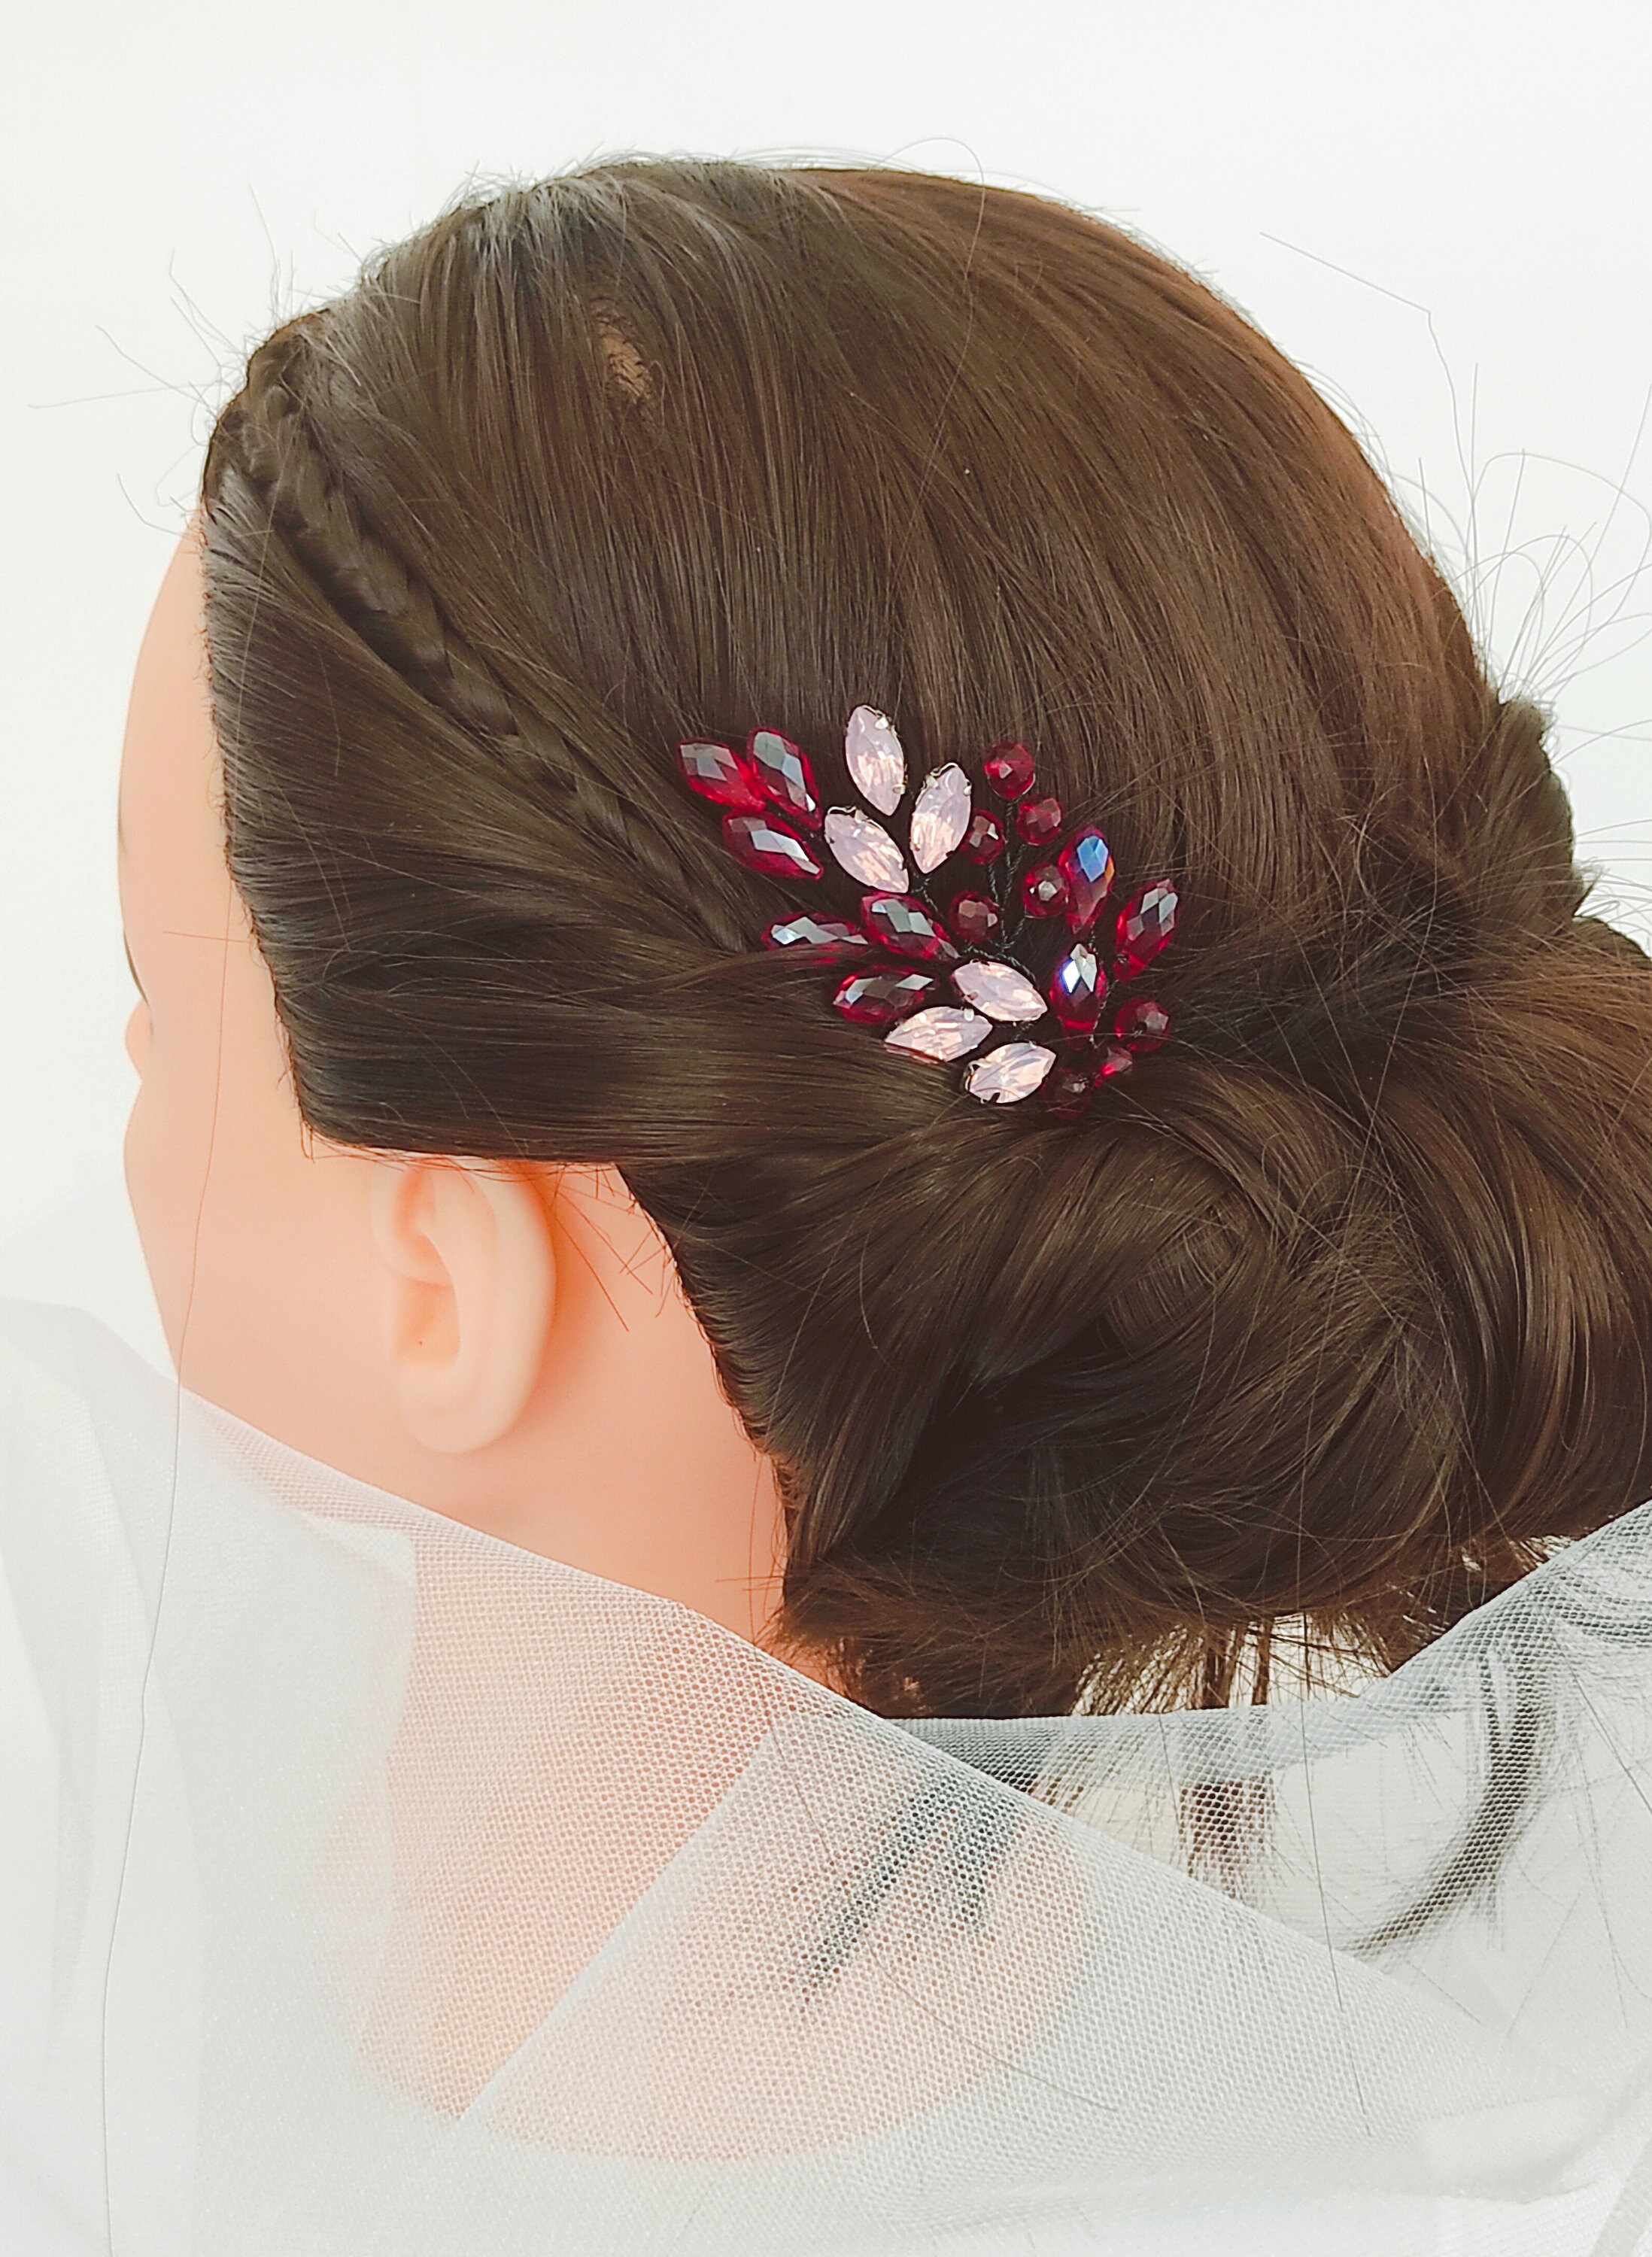 Prom Hair Accessory Red / Red Hair Vine / Bridesmaid Red Hair - Etsy